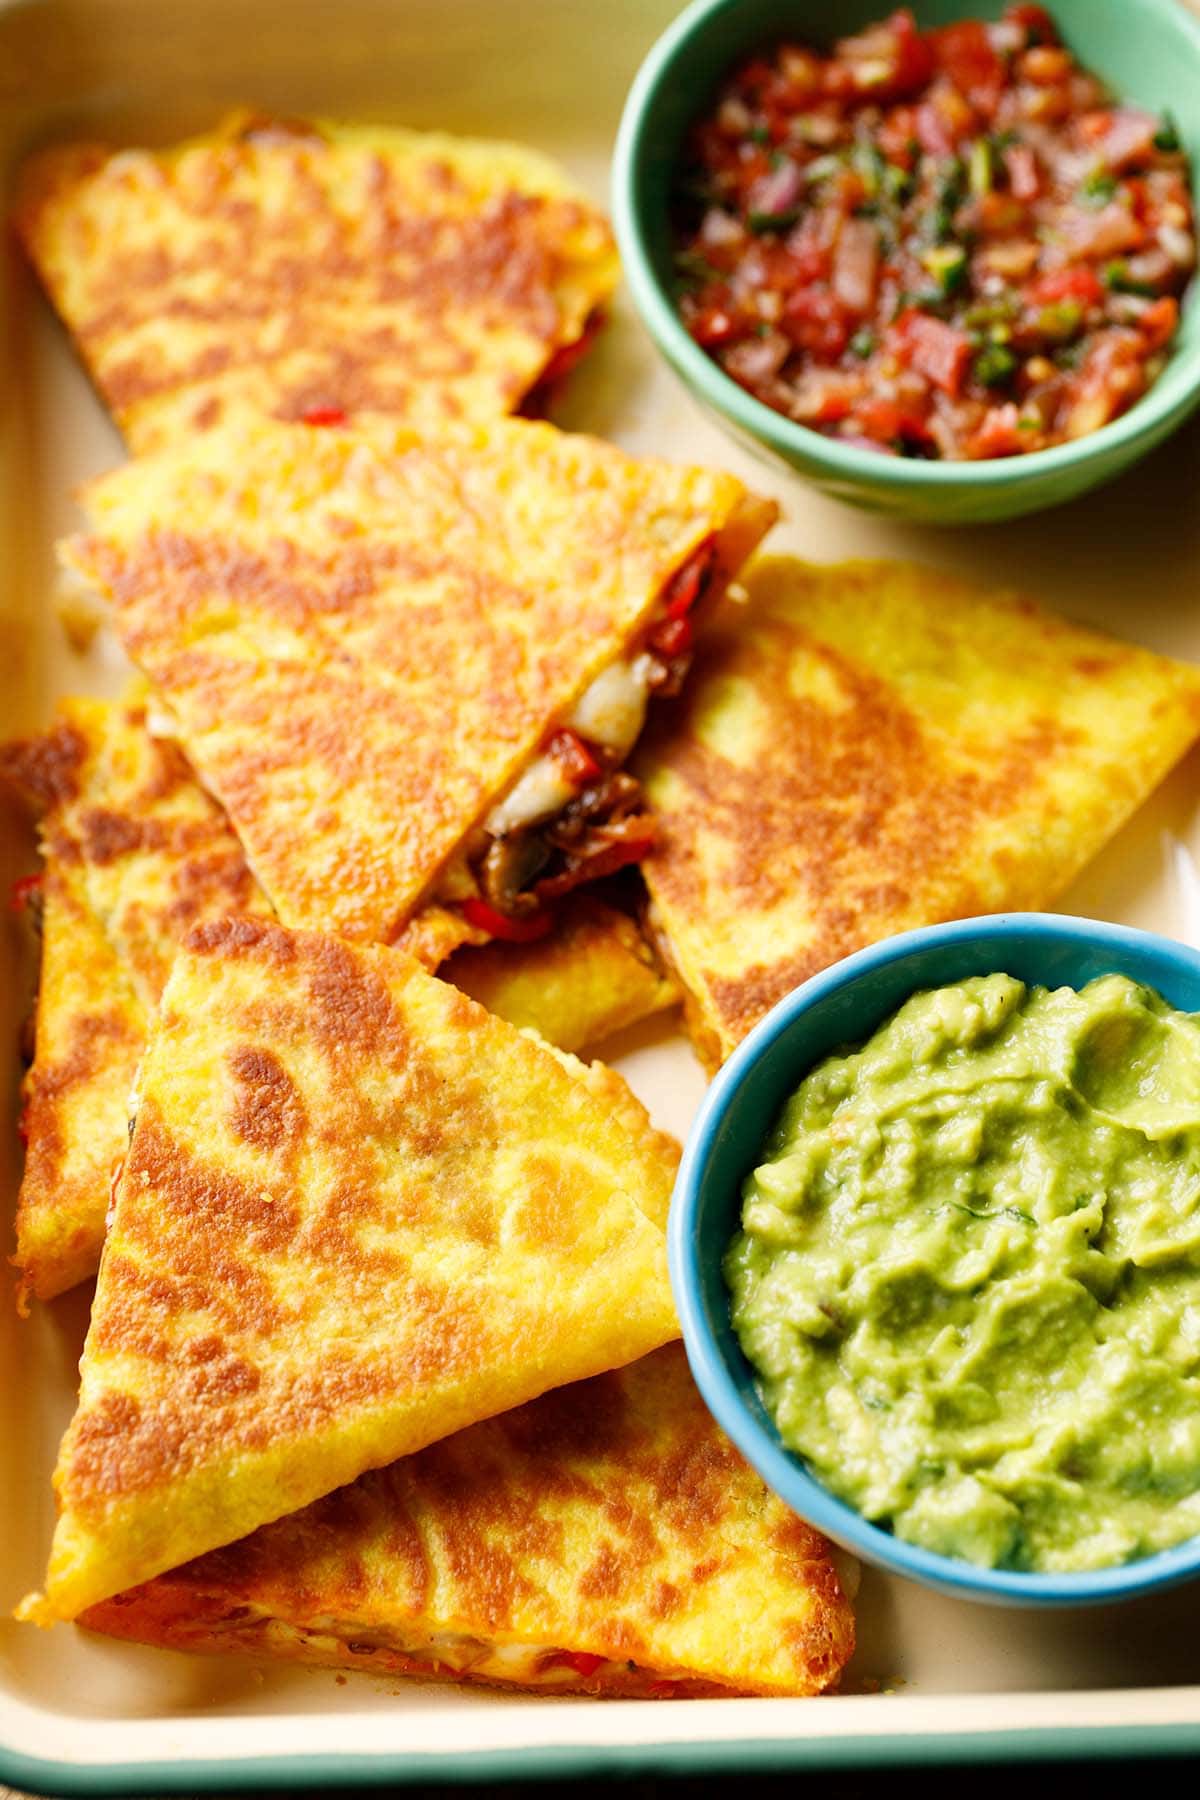 veggie quesadilla triangles served in a tray with a side of guacamole and salsa.